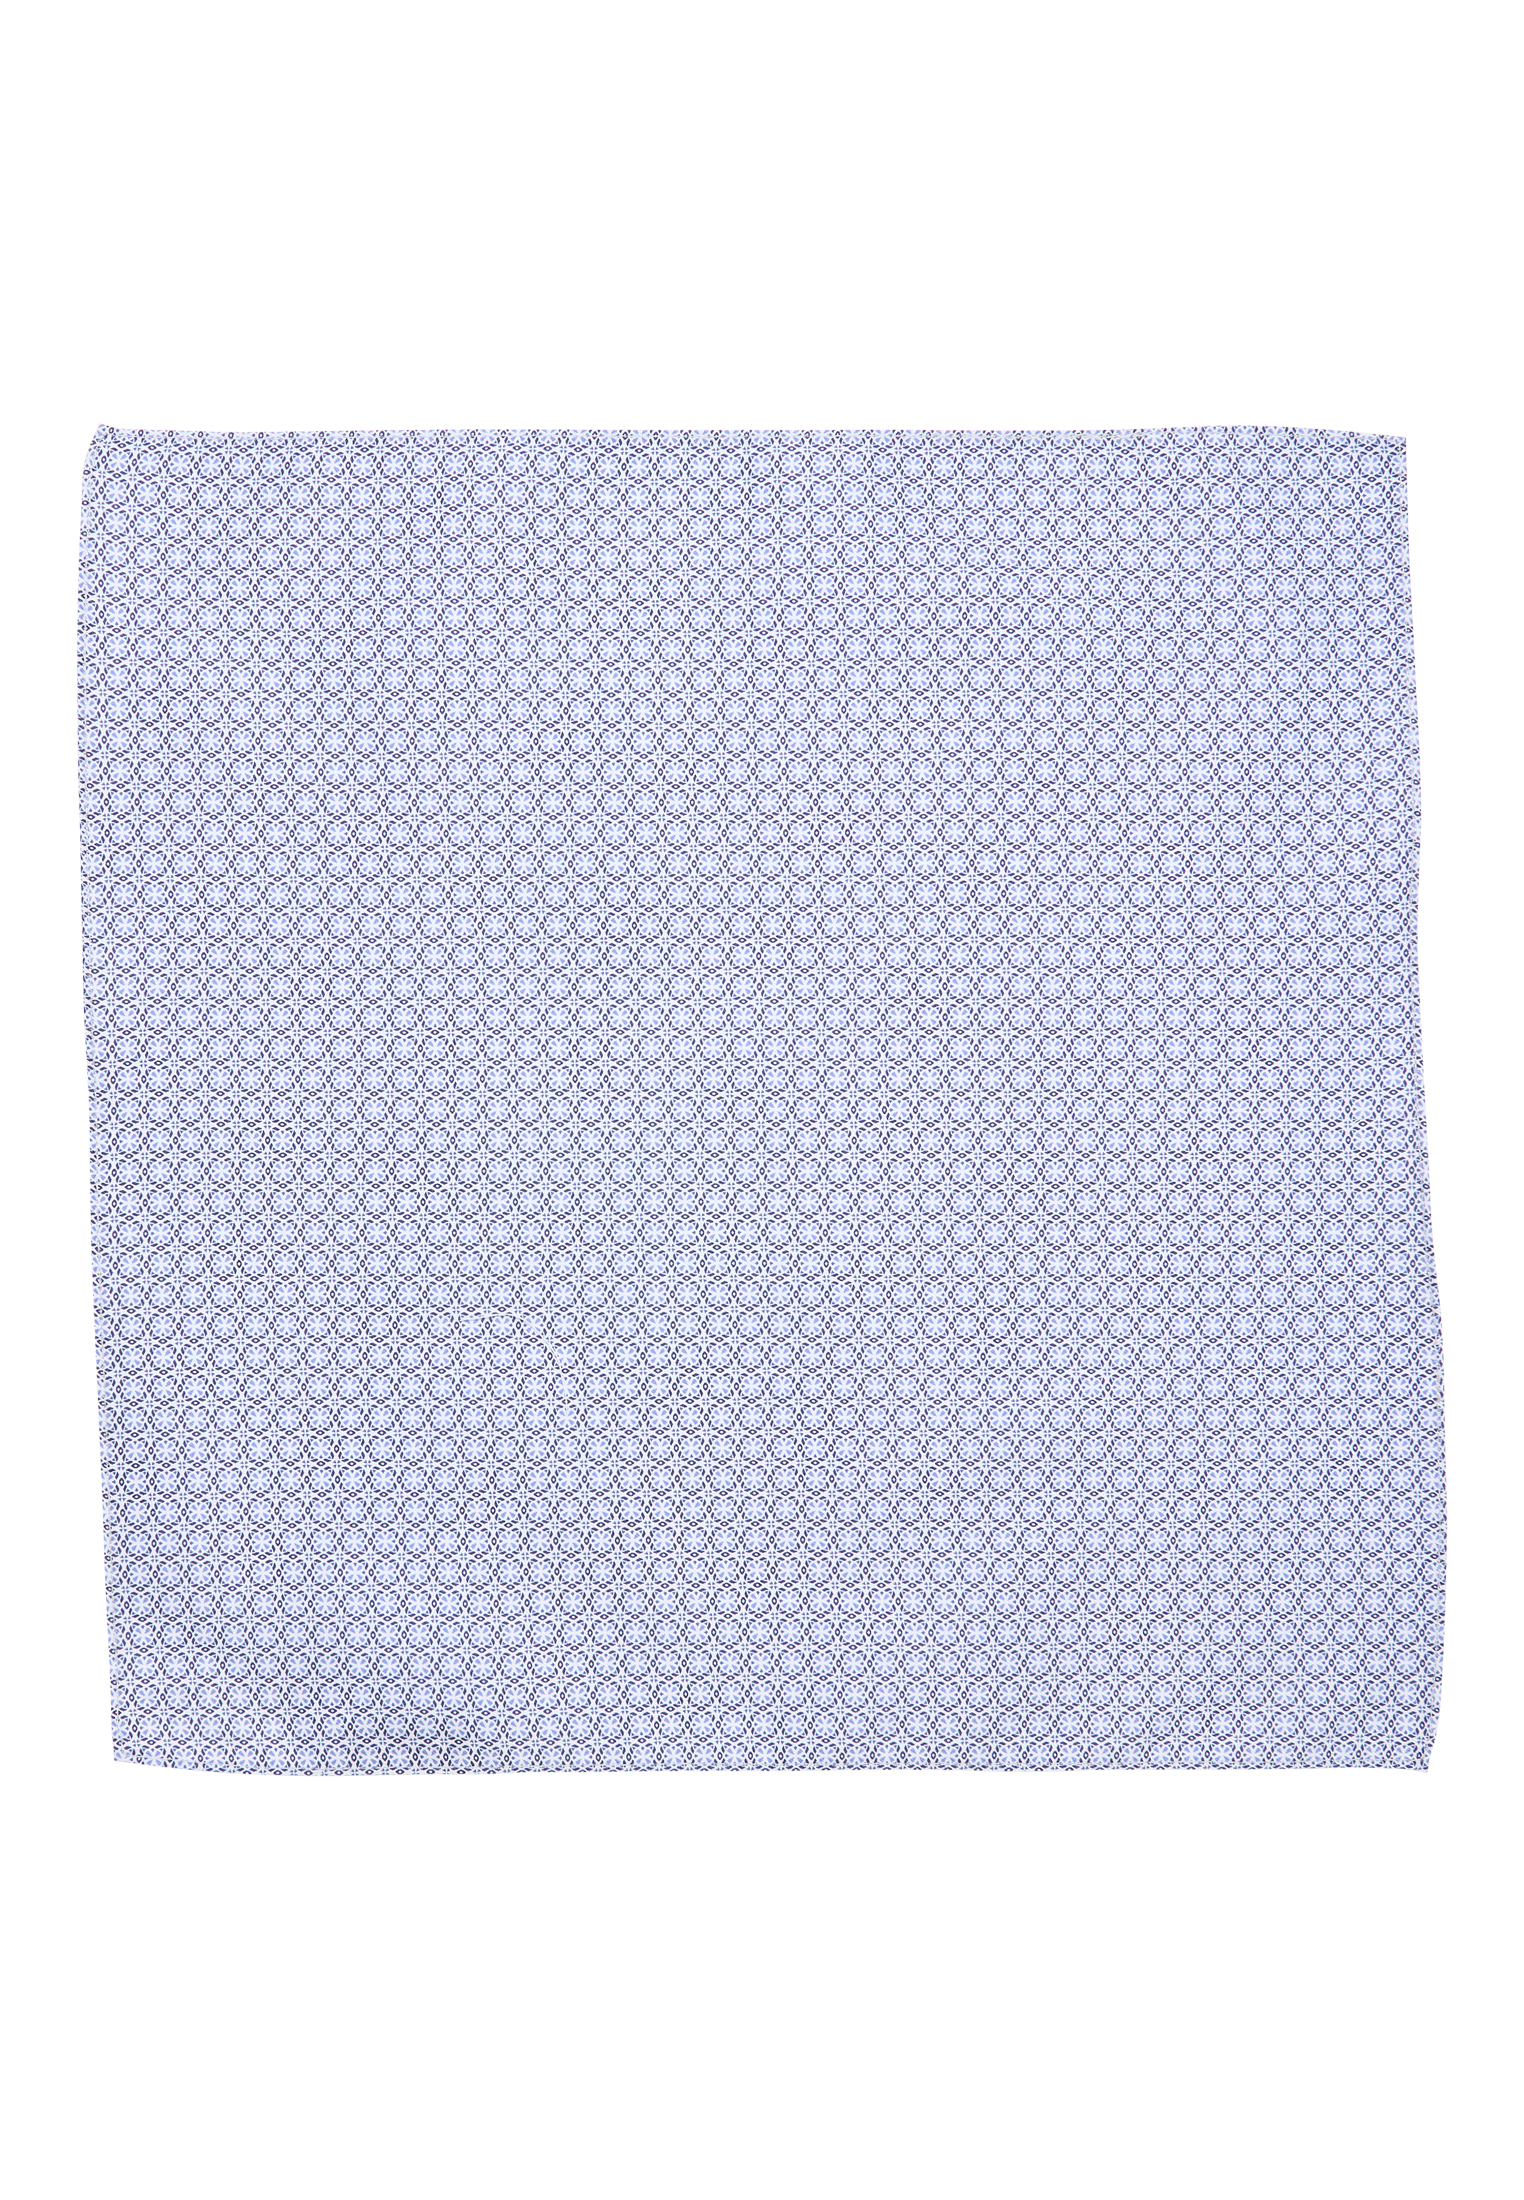 Pocket square in blue checkered